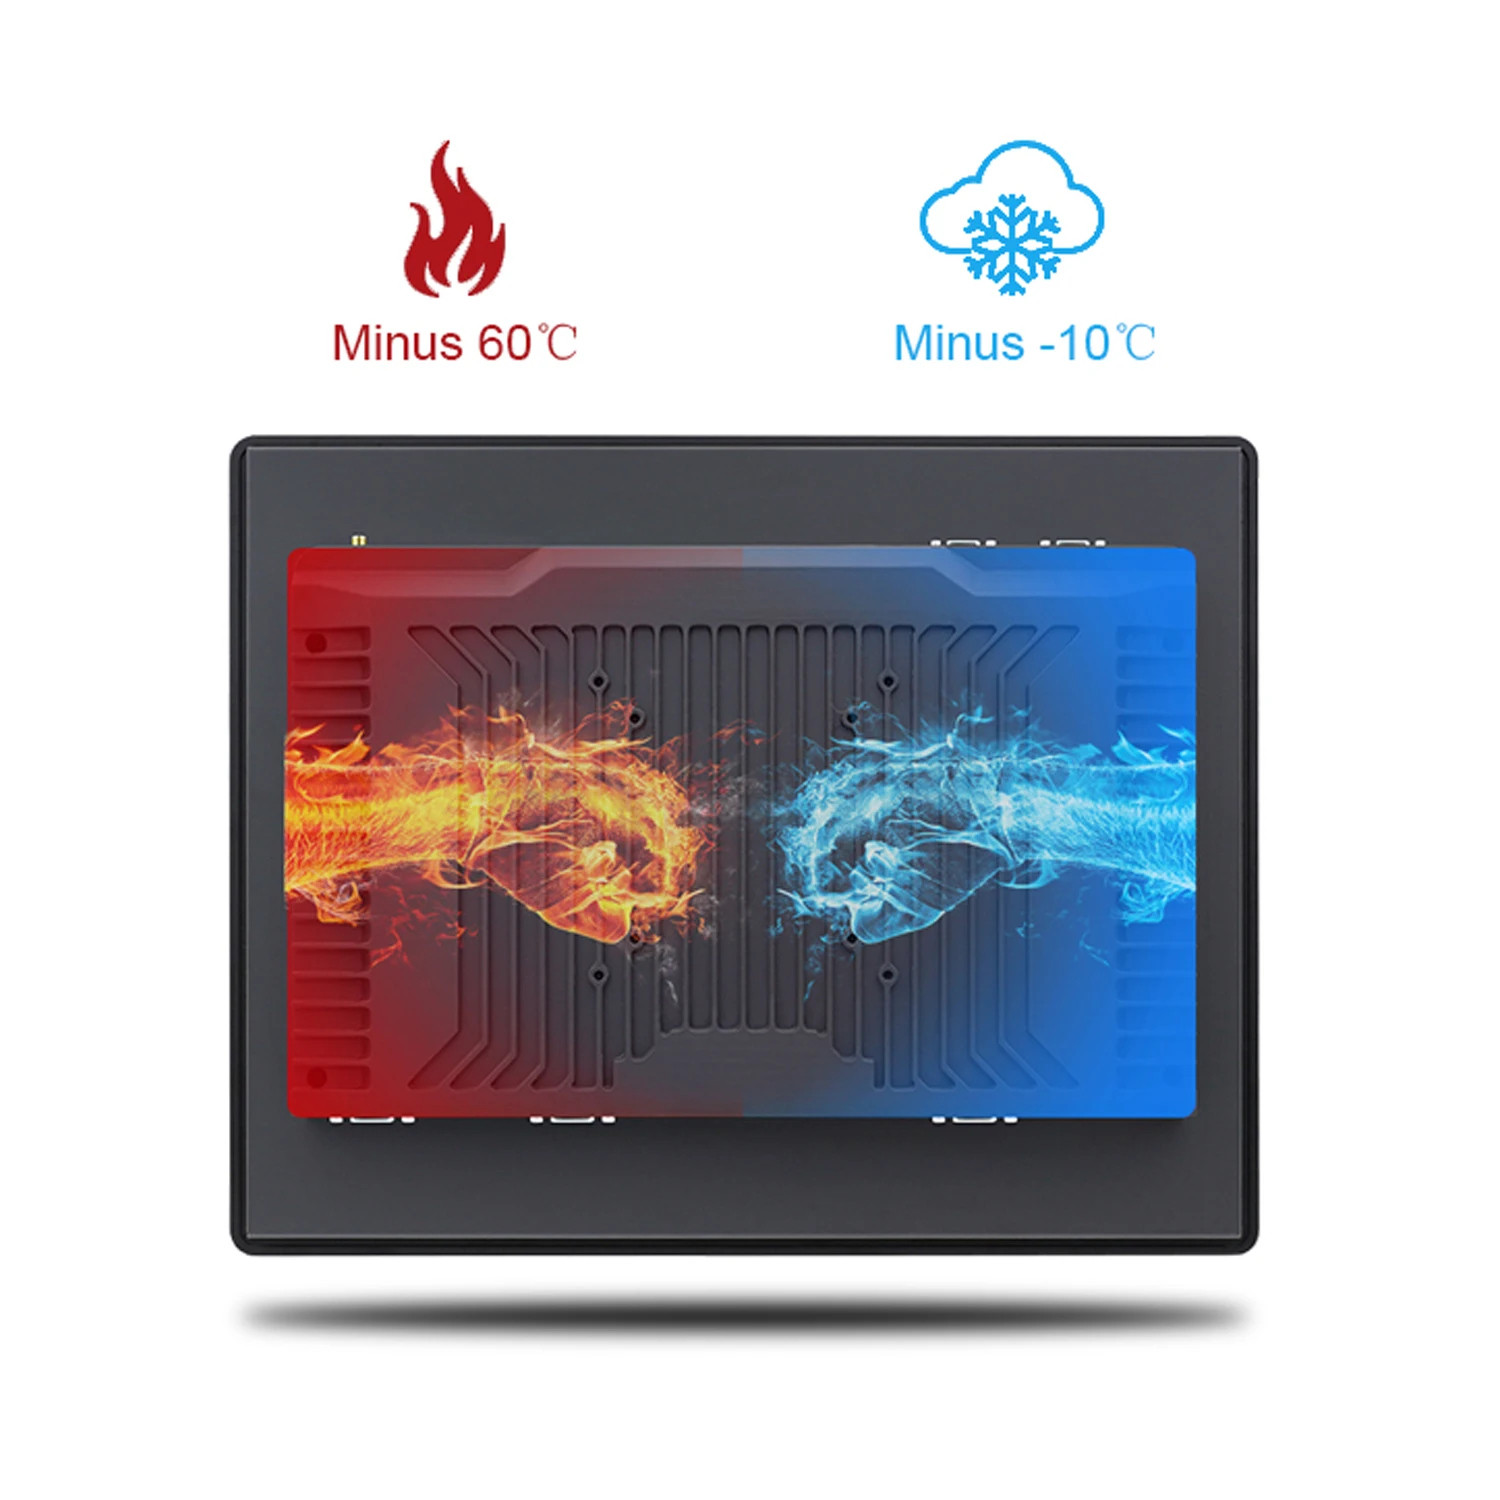 12 10 15 Inch Embedded Tablet PC Industrial Computer with Resistive Touch Screen All-in-One Front Panel Waterproof and Dustproof enlarge